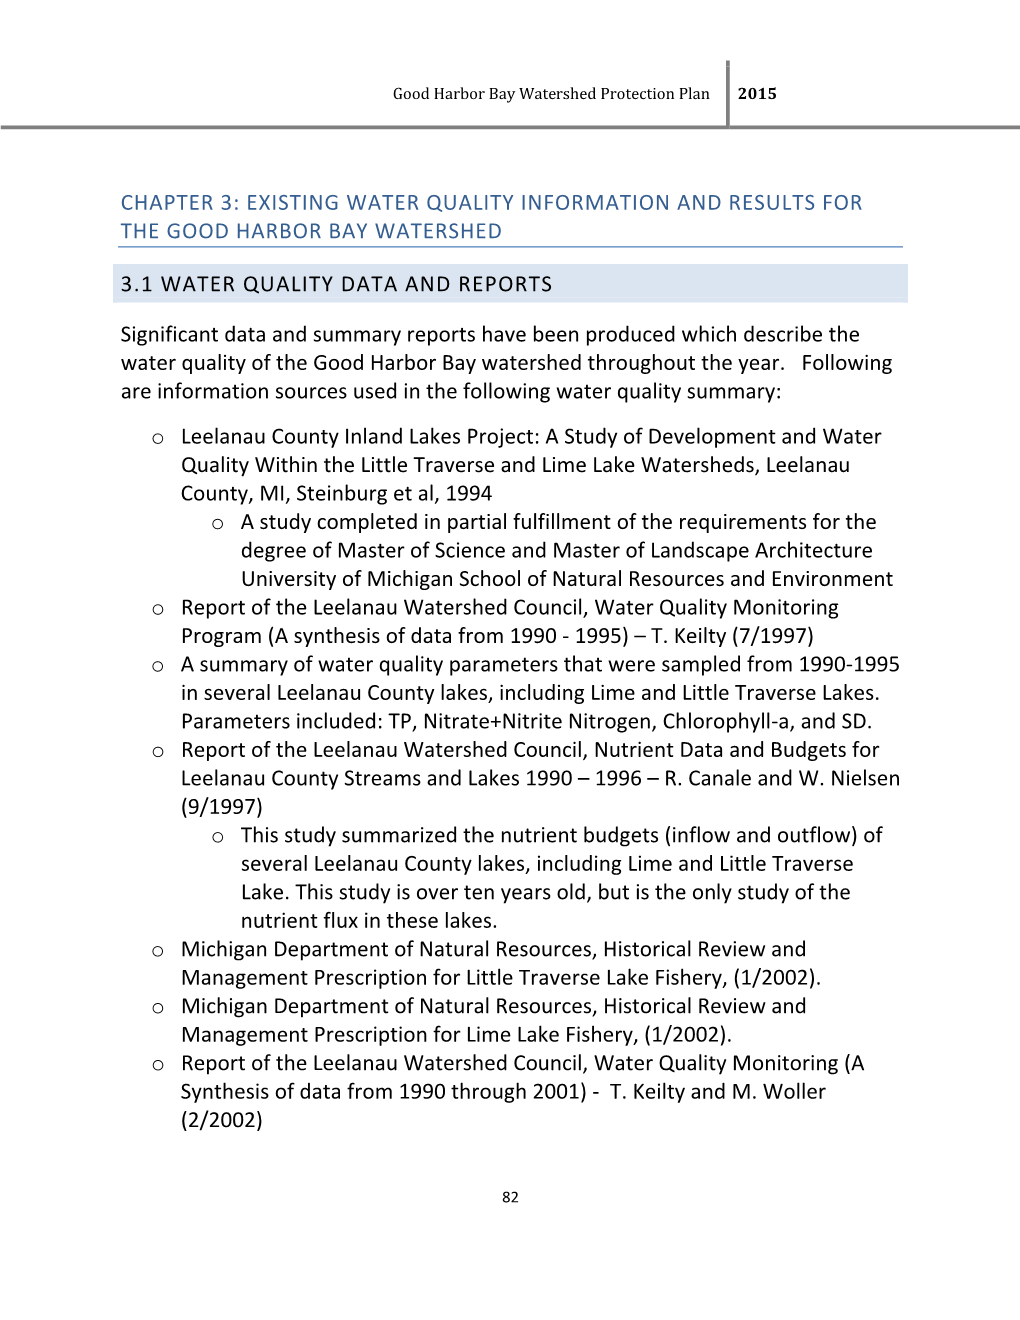 Existing Water Quality Information and Results for the Good Harbor Bay Watershed